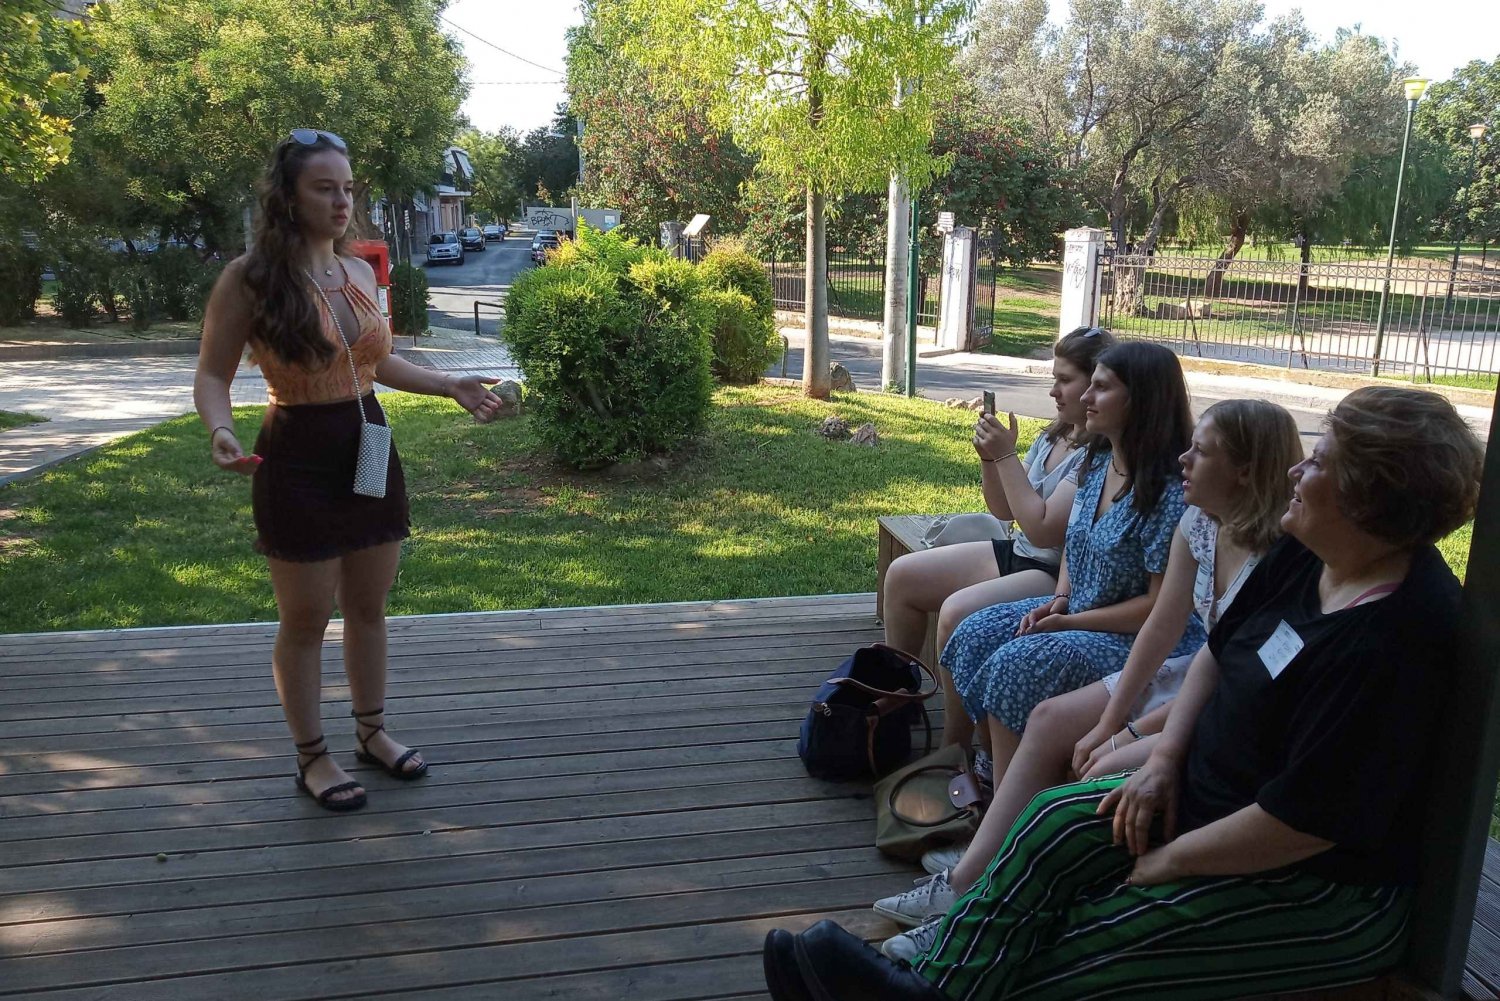 Athens: Philosophy Experience at Plato's Academy Park